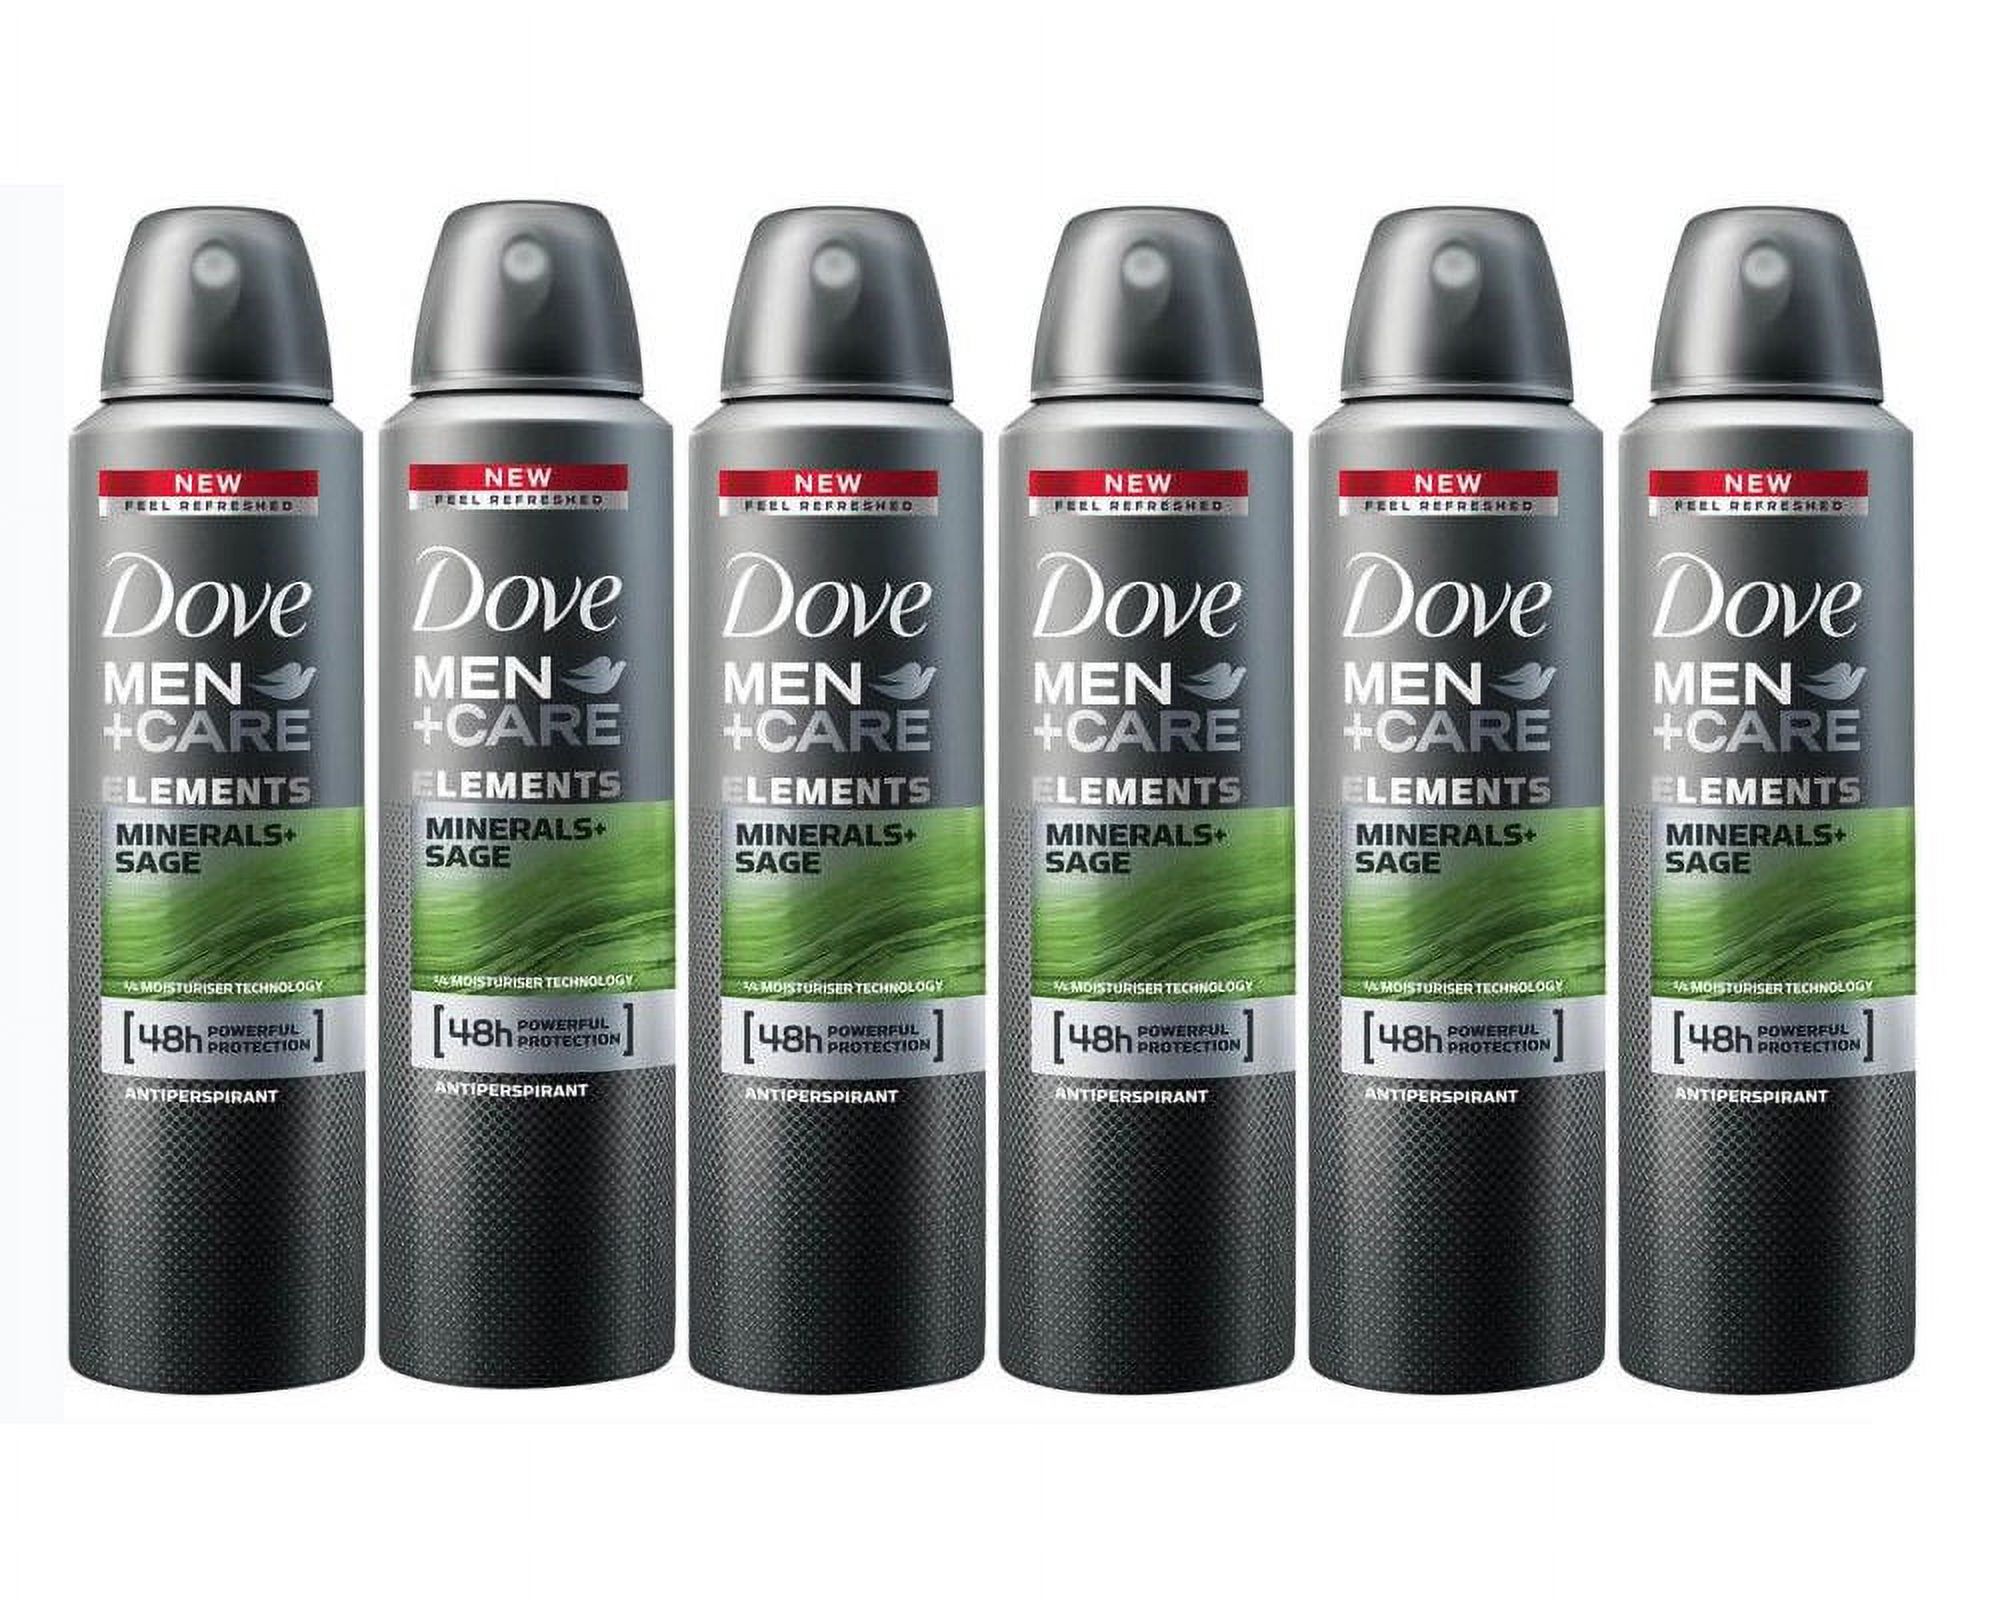 6 Pack Dove Mens+Care Elements Minerals + Sage Antiperspirant Deo Spray 150ml - image 2 of 2